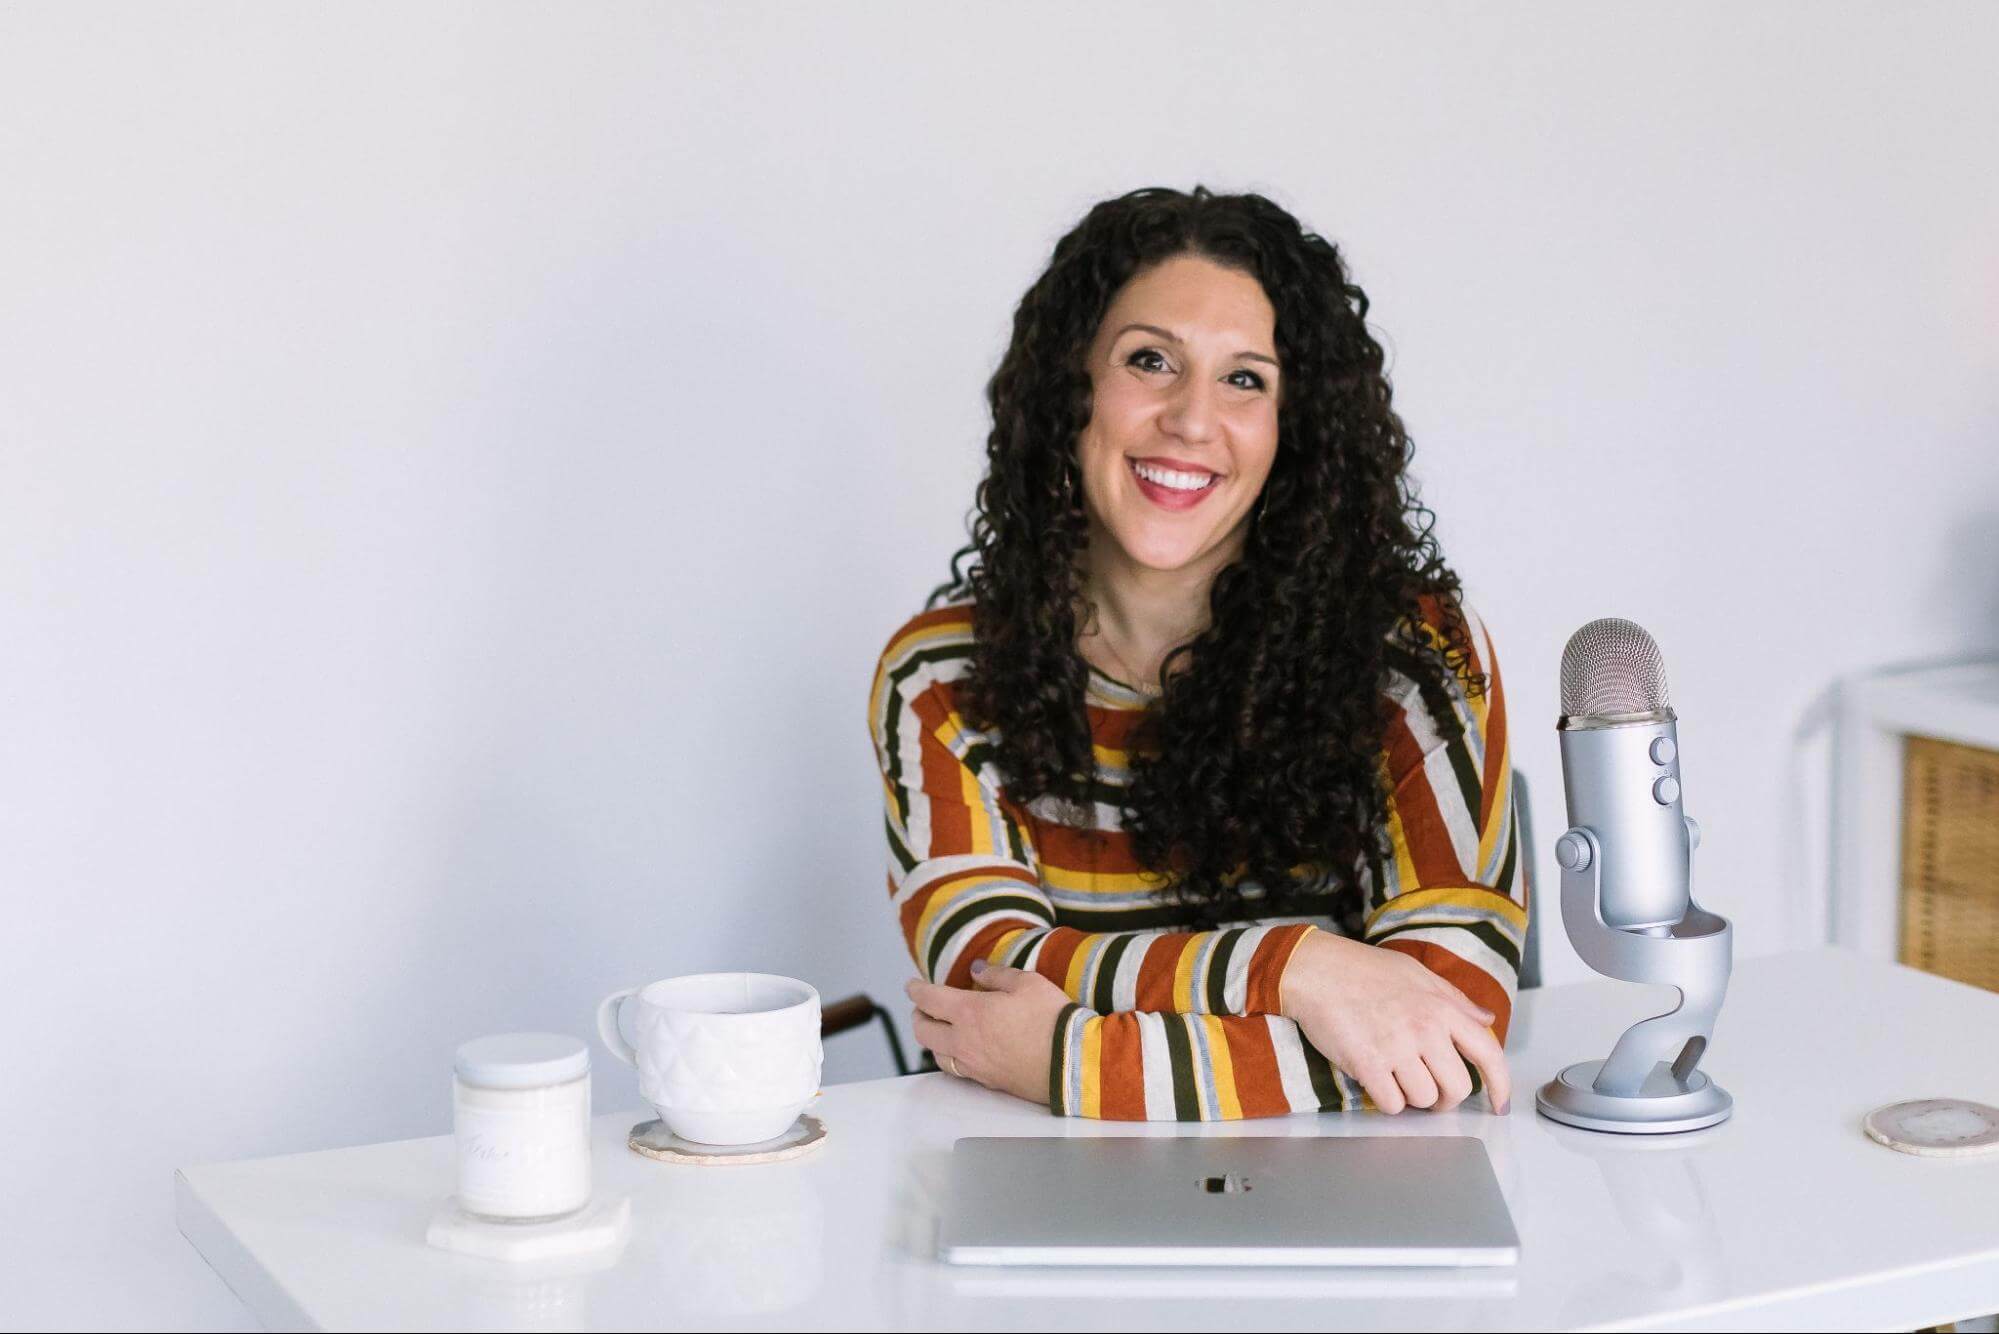 Mallory Erickson sits at a desk with her laptop, a coffee mug, and a podcast microphone.